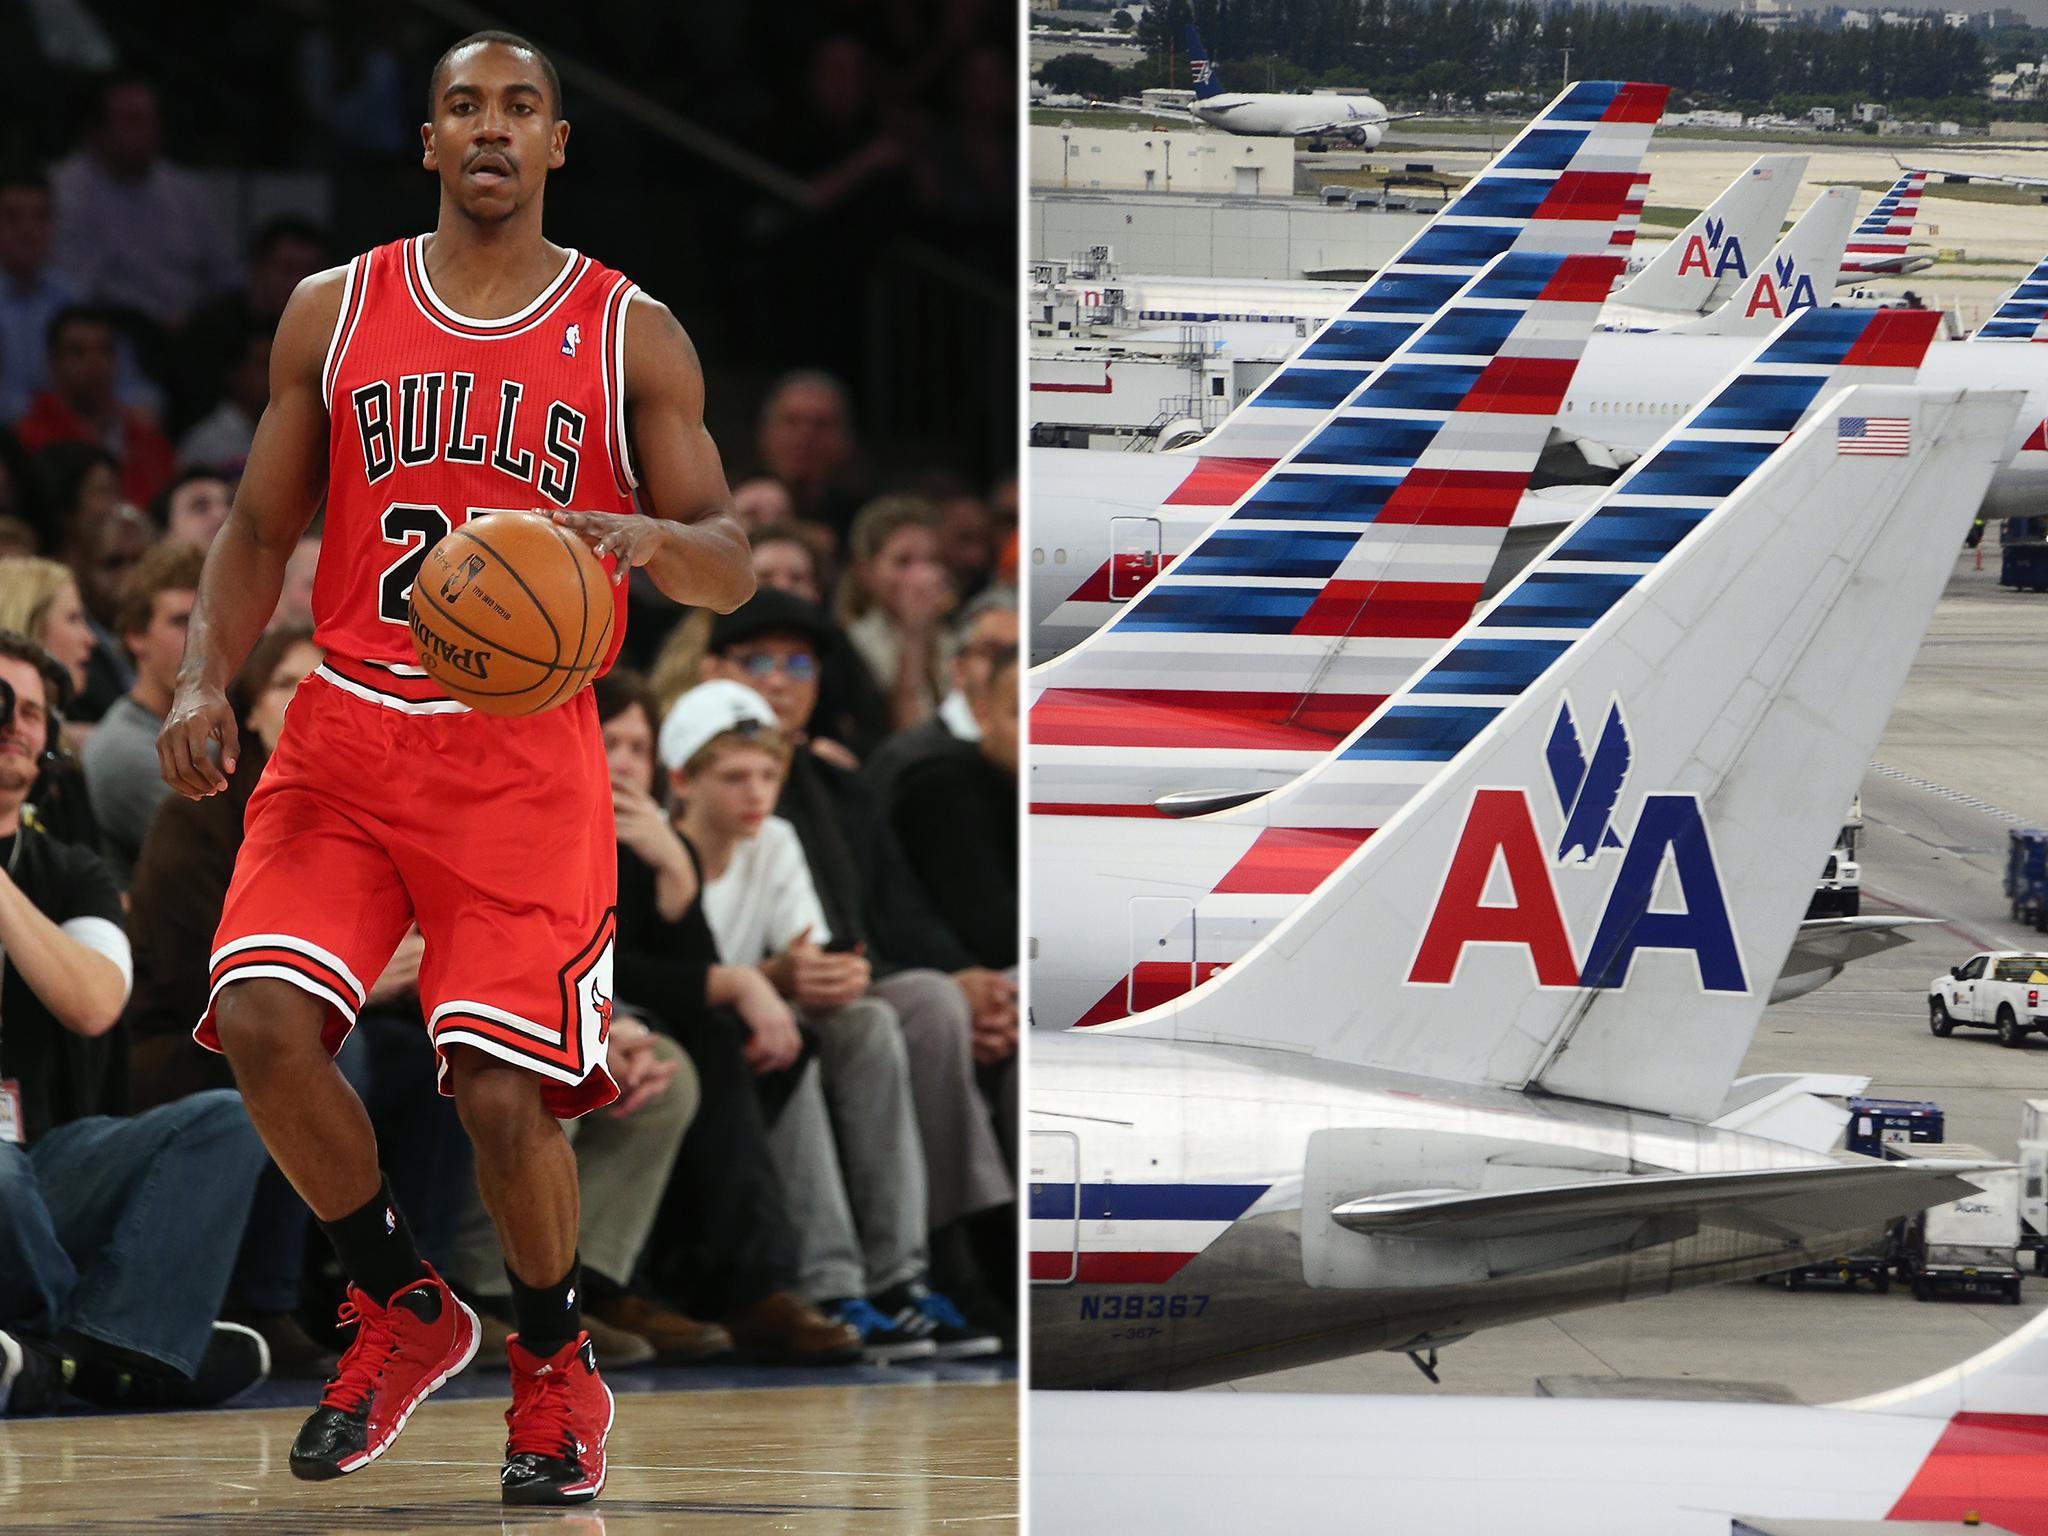 Marquis Teague was one of two basketball players wrongly removed from an American Airlines flight